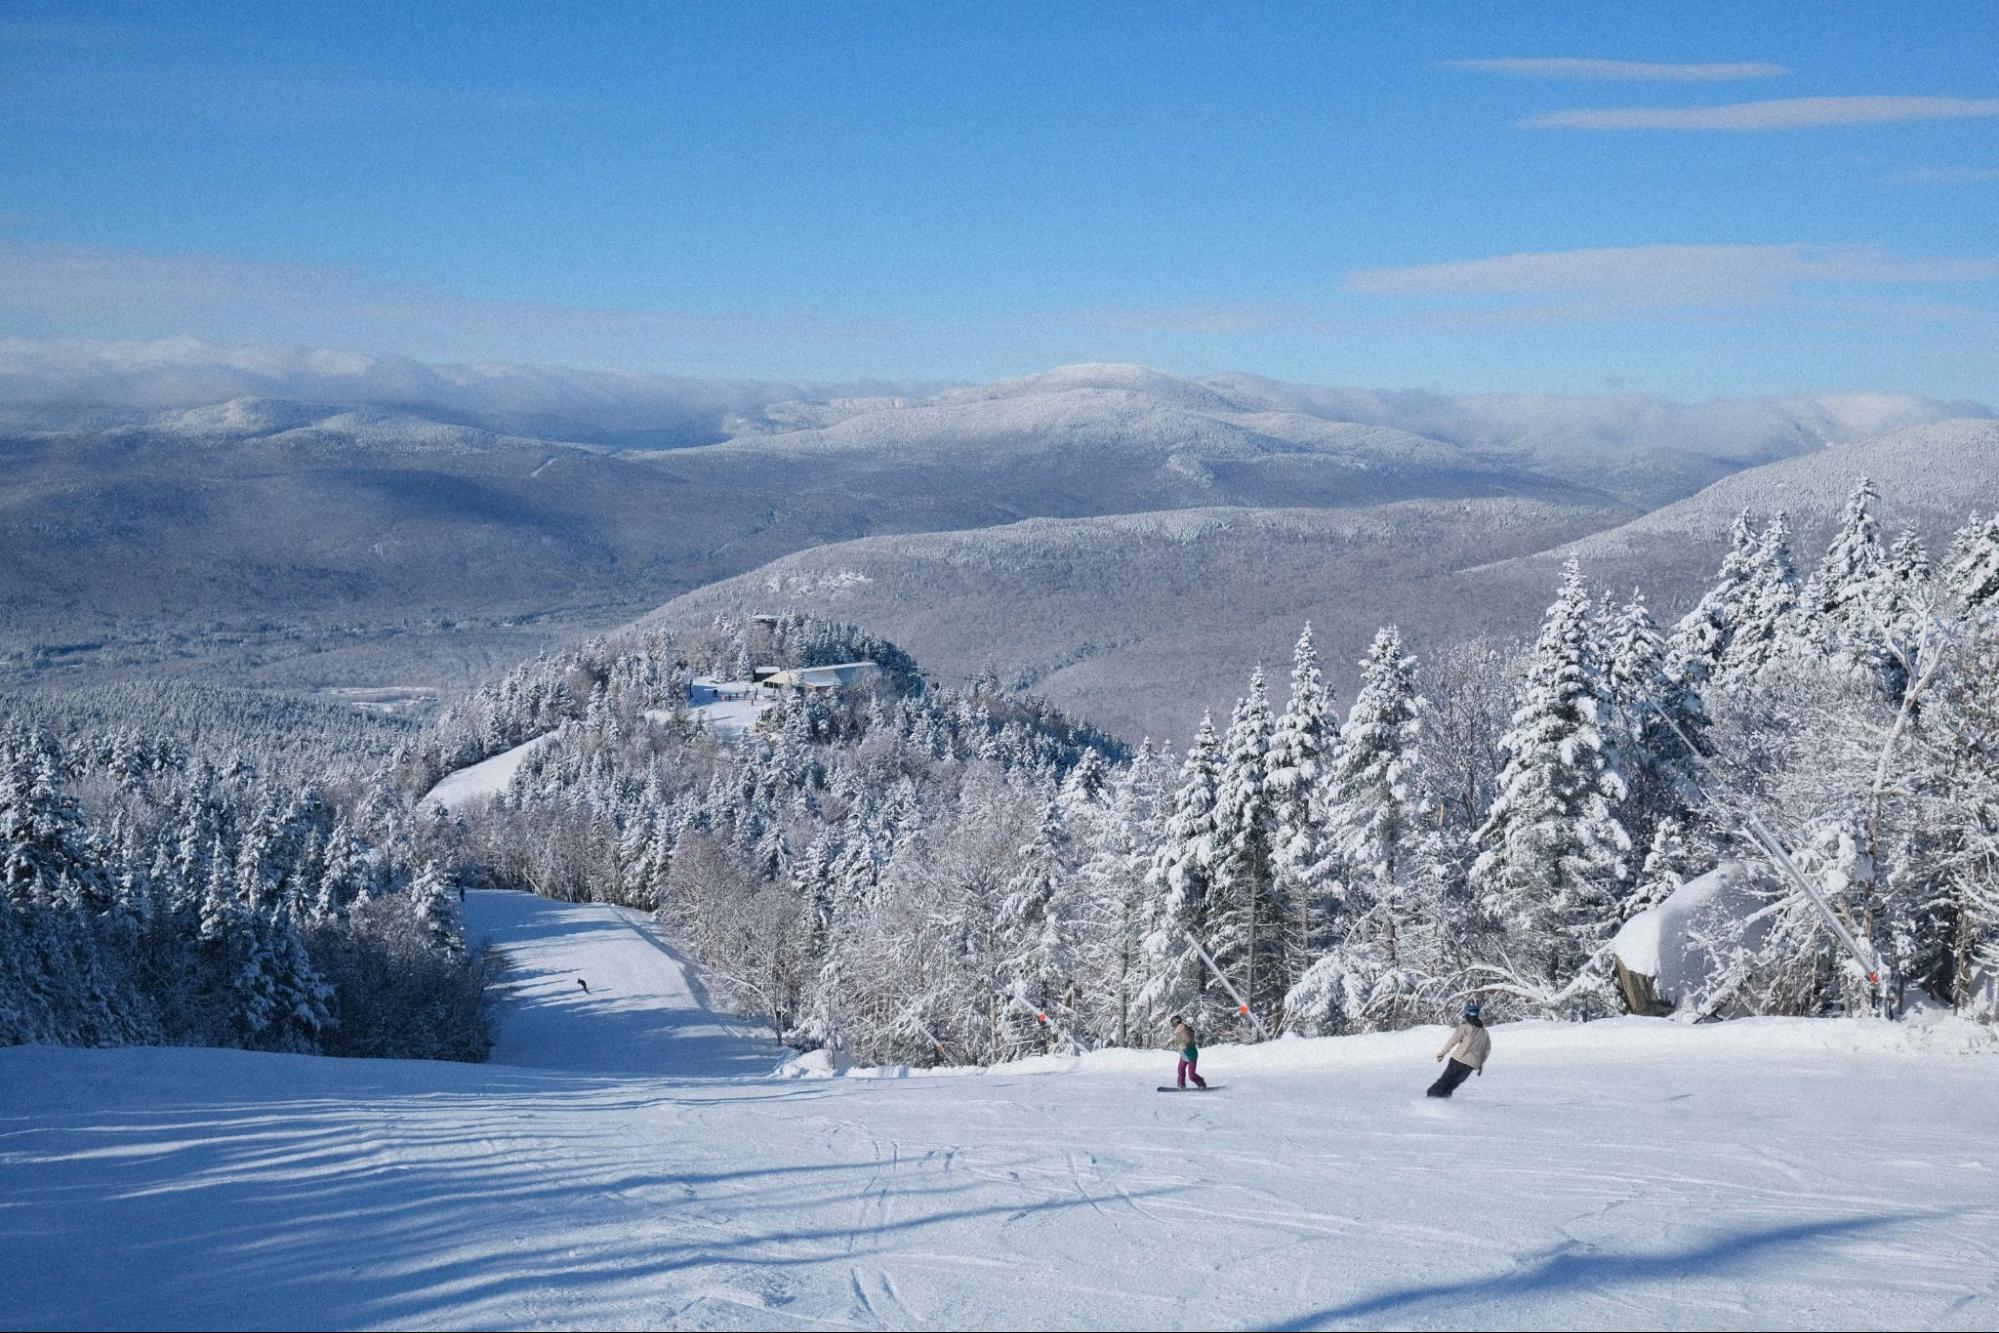 Skiers on a ski slope with mountains in New Hampshire.